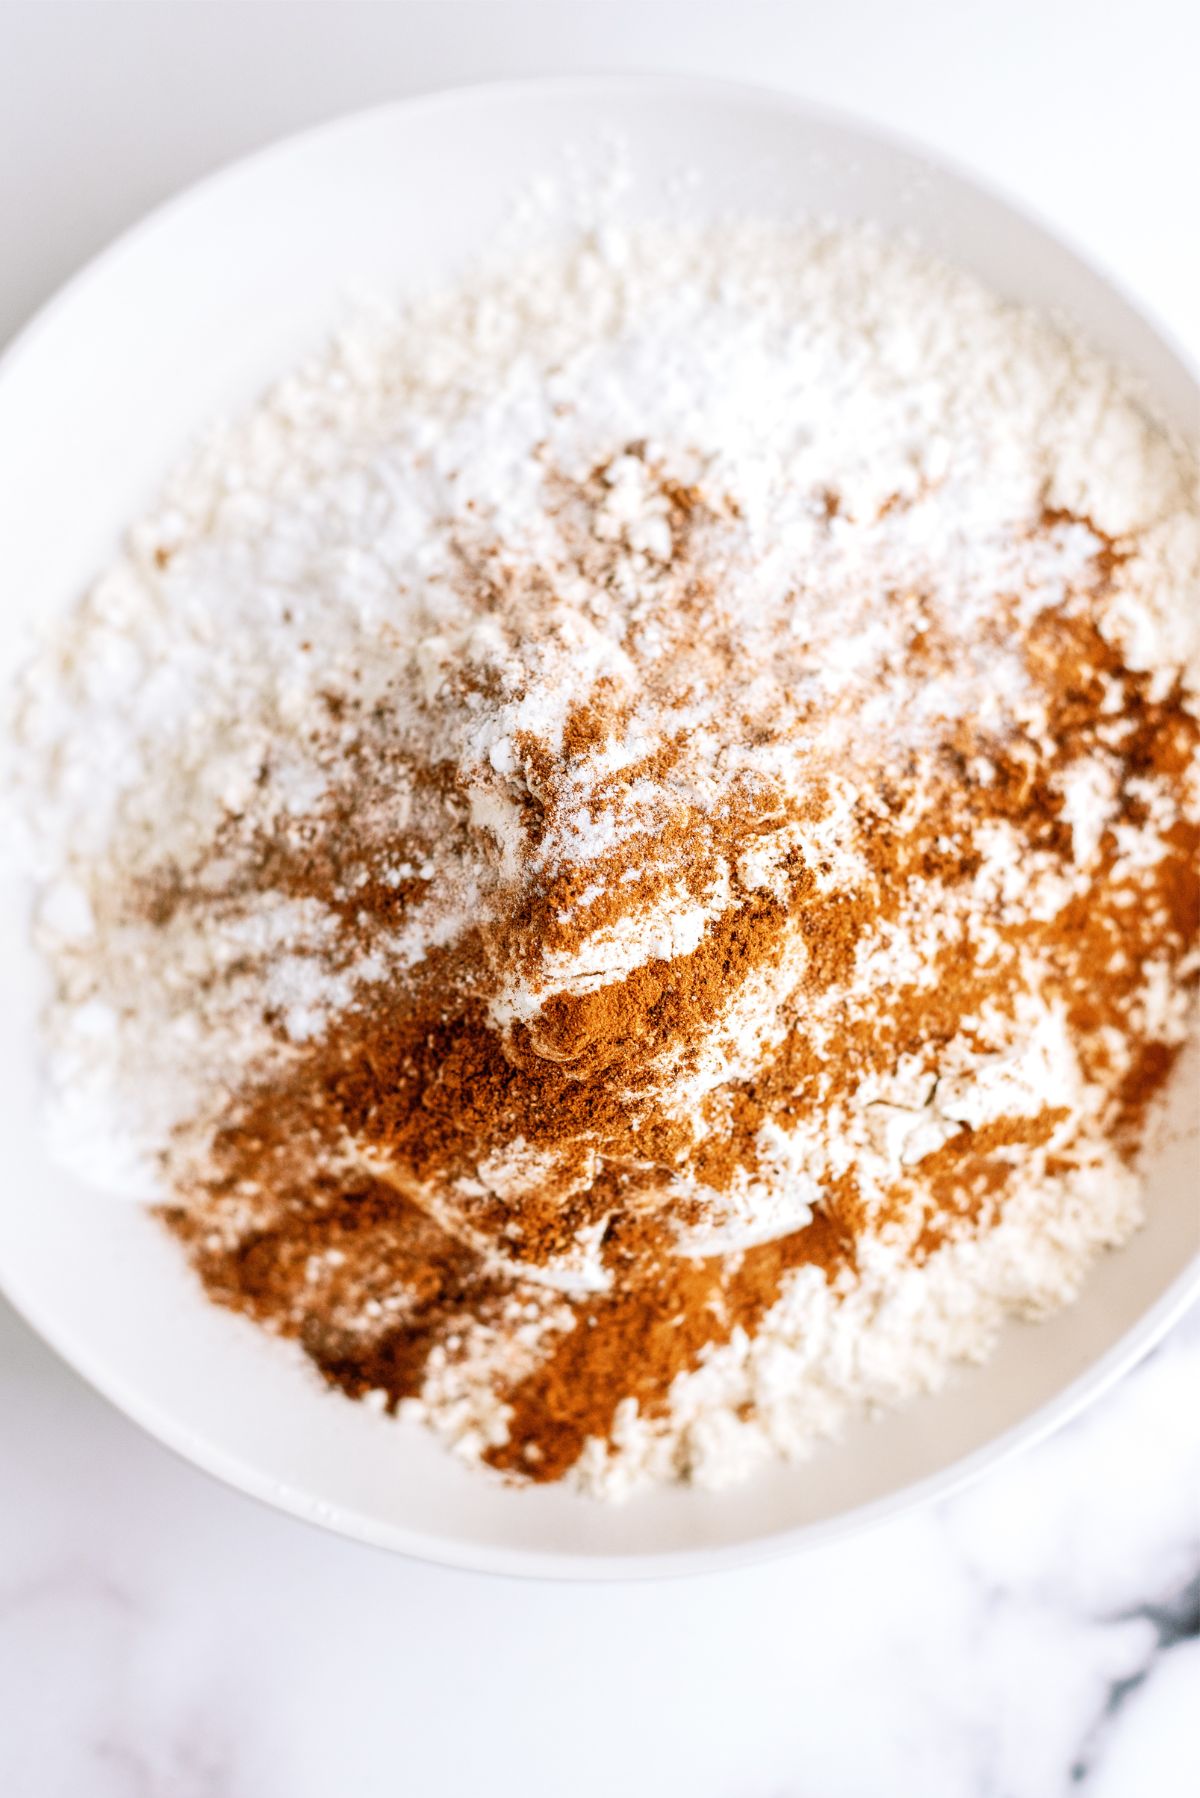 Dry ingredients together in a mixing bowl